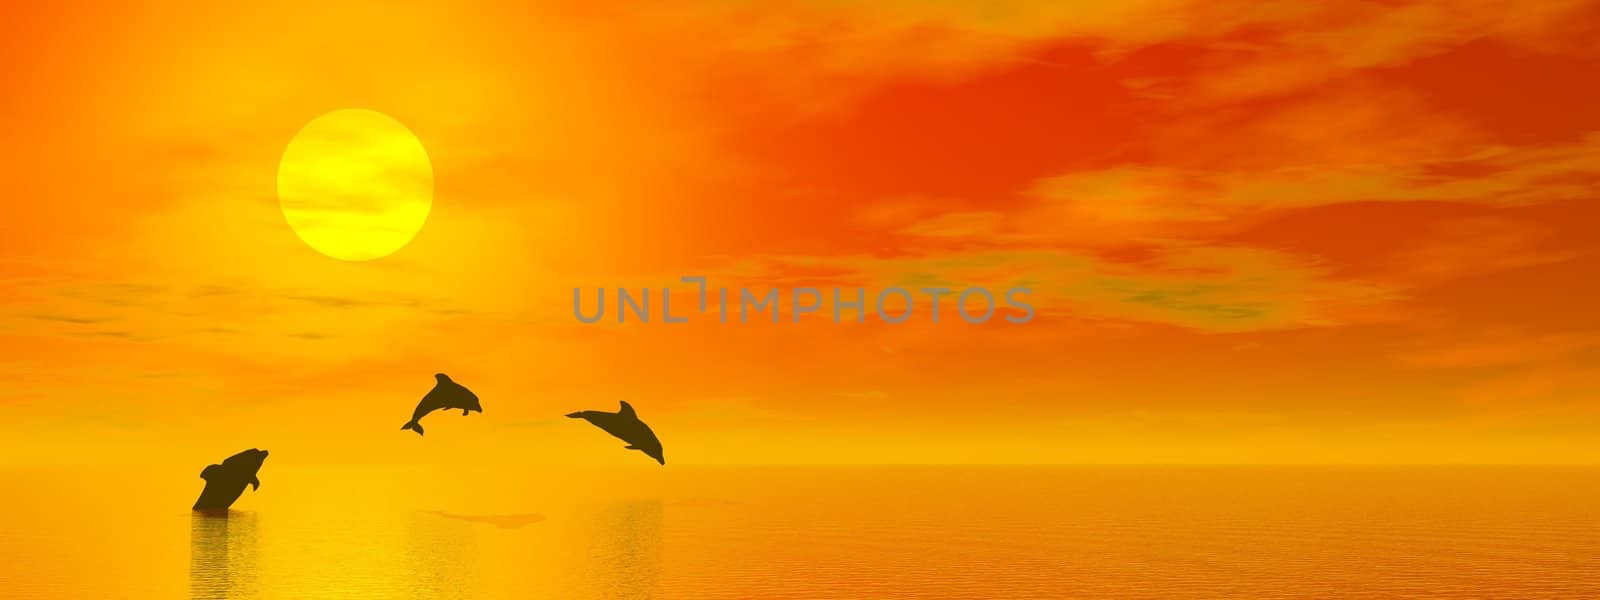 Dolphins by sunset - 3D render by Elenaphotos21